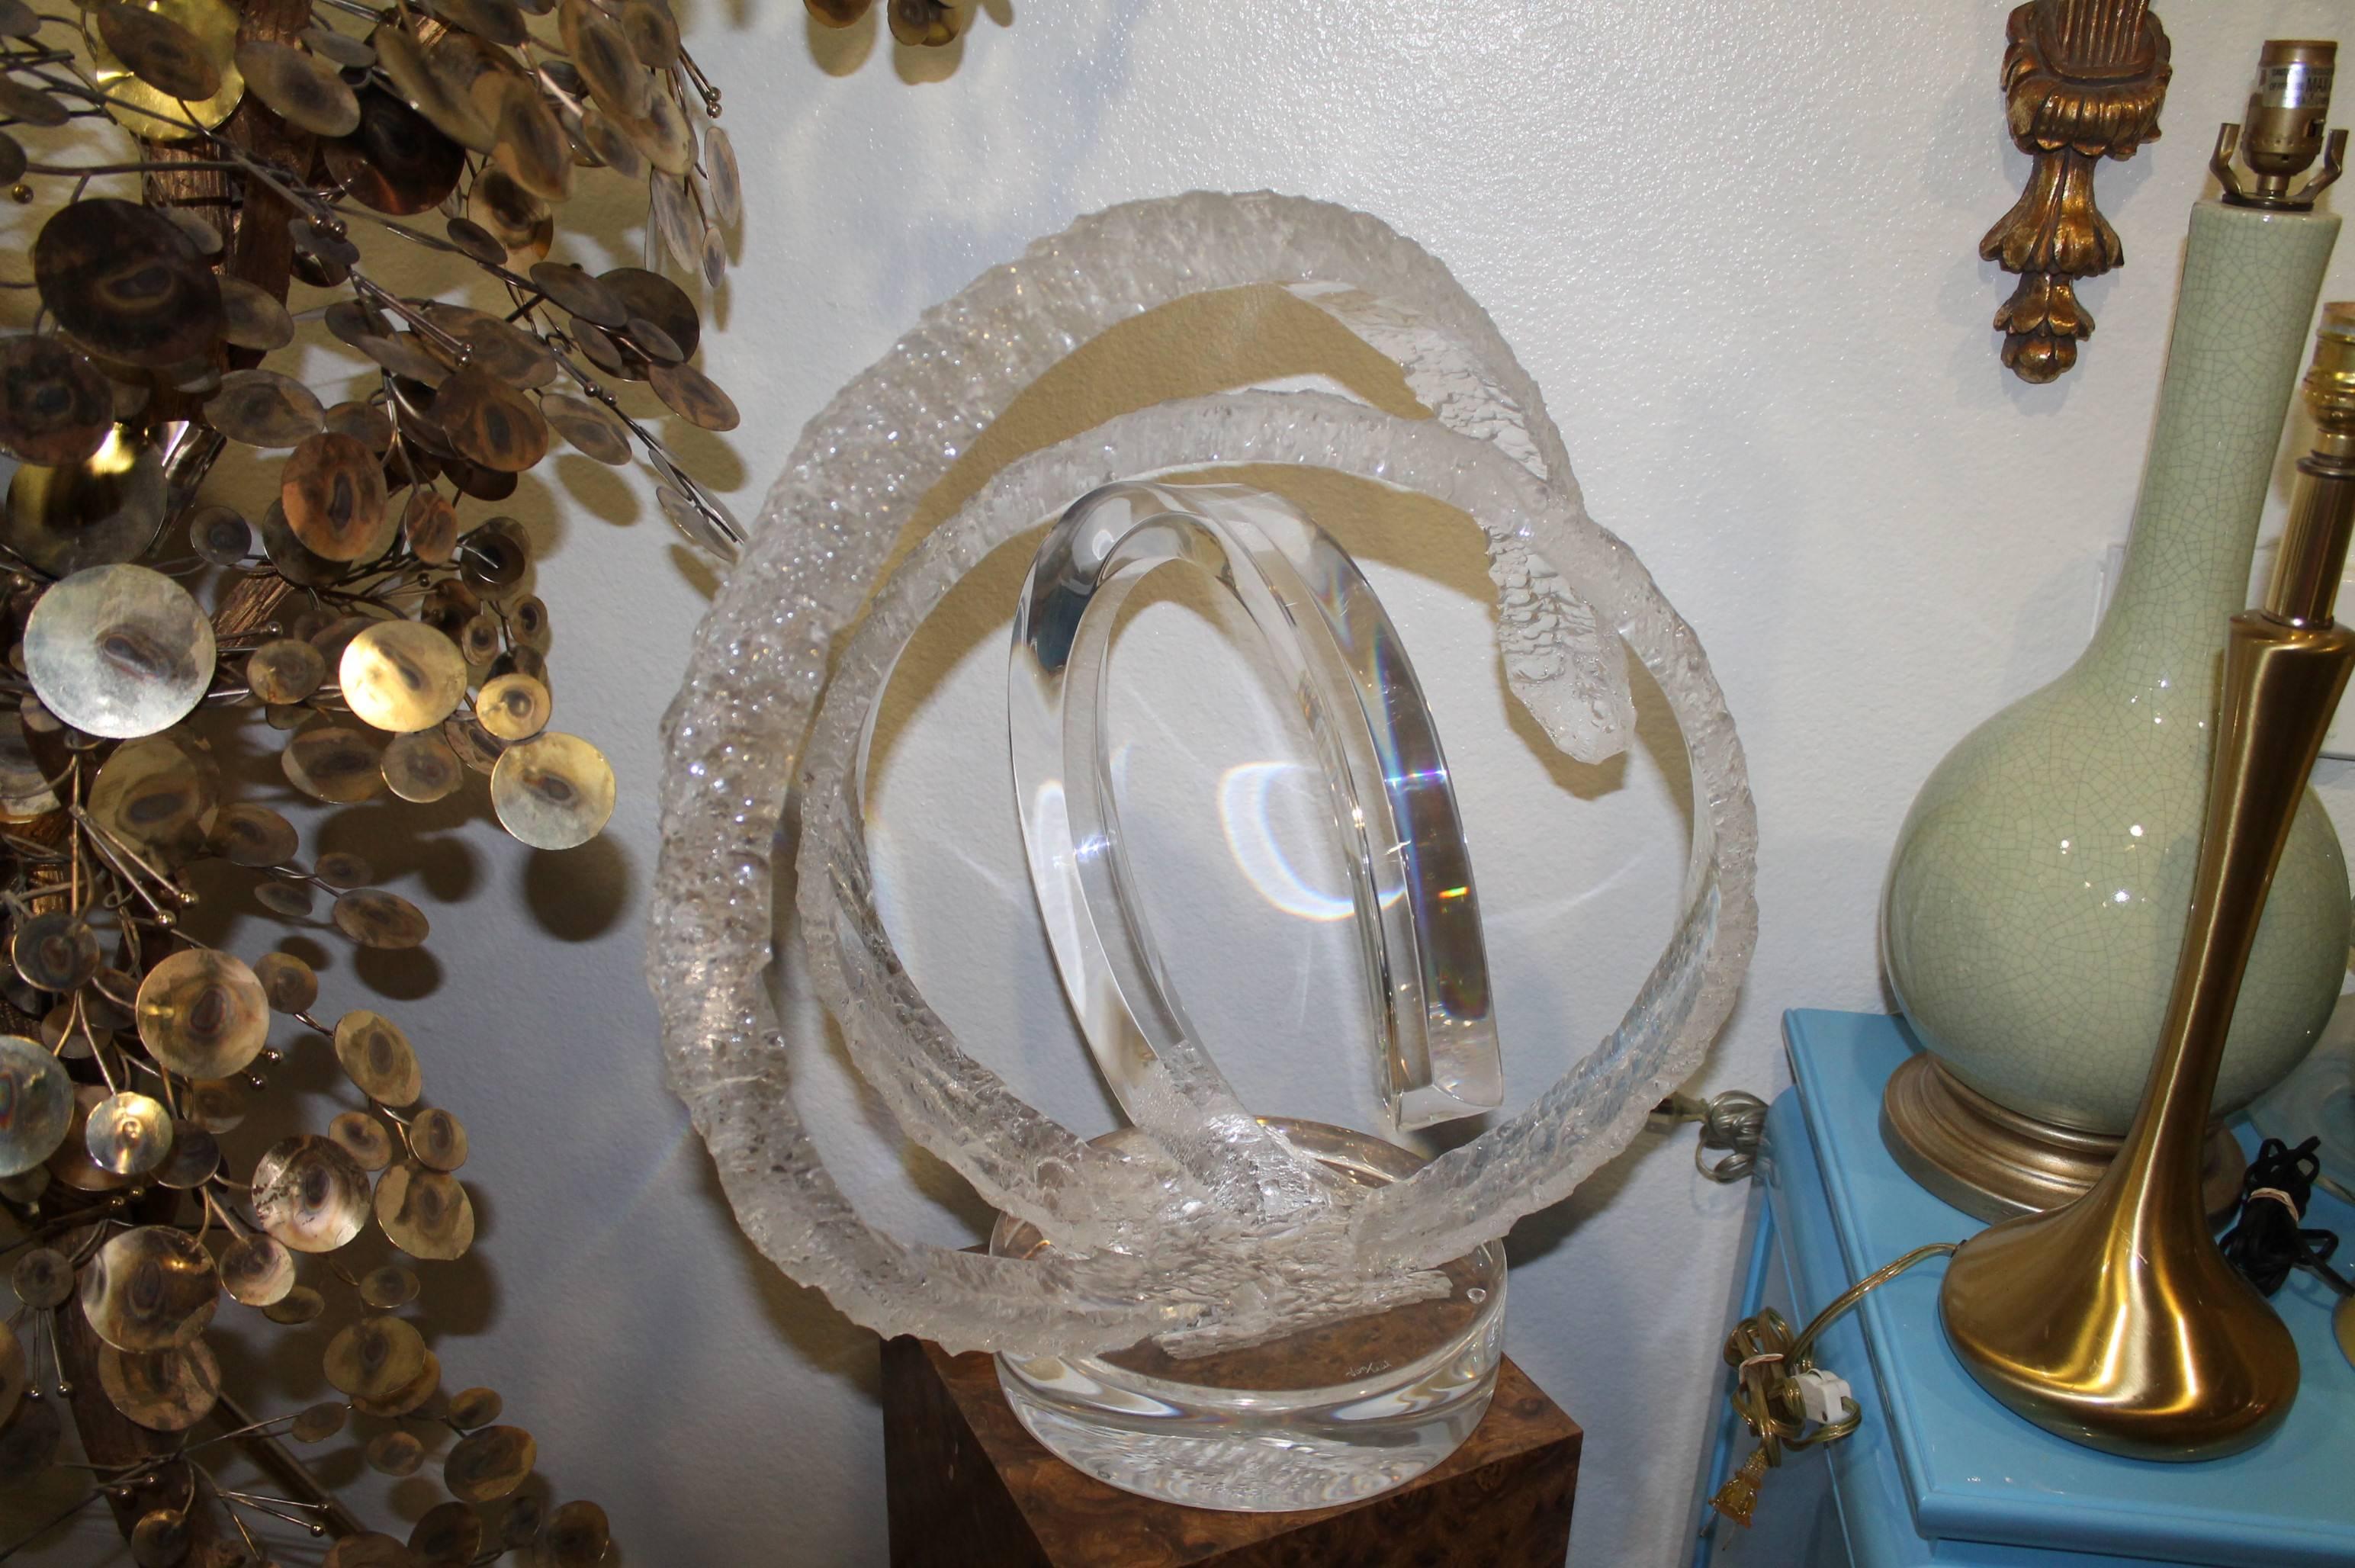 Signed Van Teal Lucite monumental sculpture large circular frosted and clear design. Perfect for the Hollywood Regency or Mid Century Modern décor!
